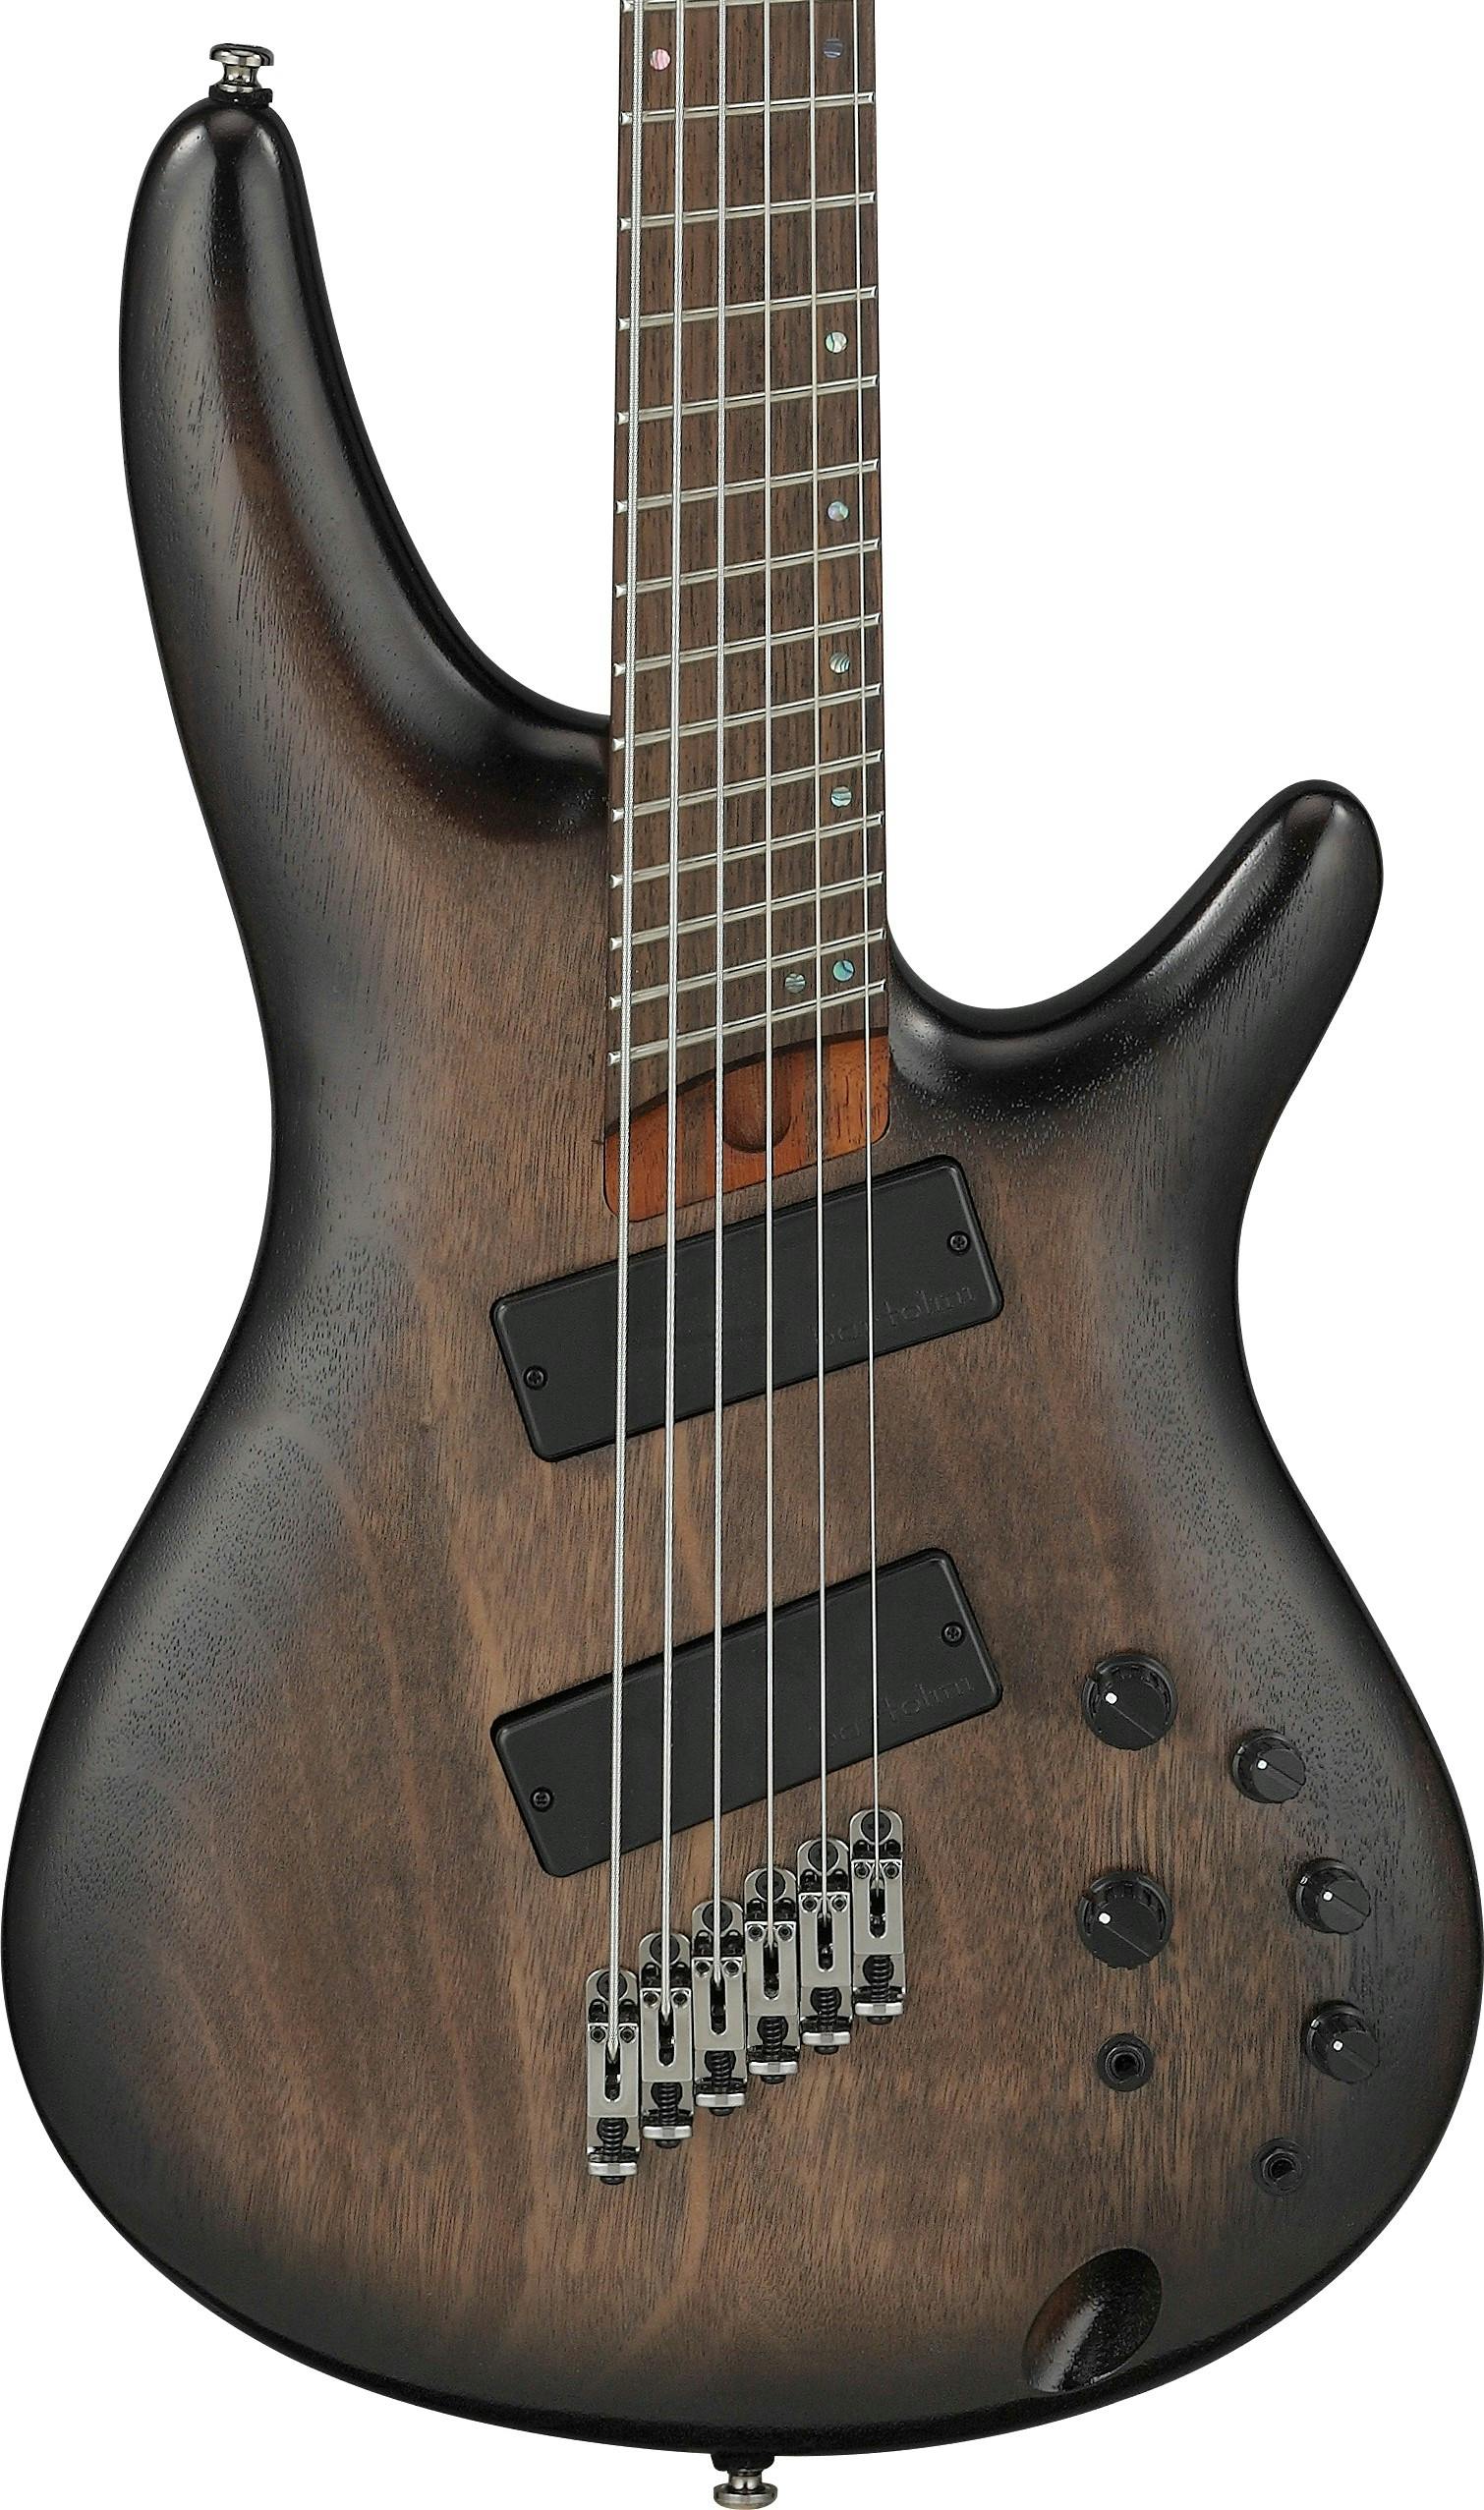 Ibanez SRC6MS-BLL 6-String Multi-Scale Bass Guitar in Black